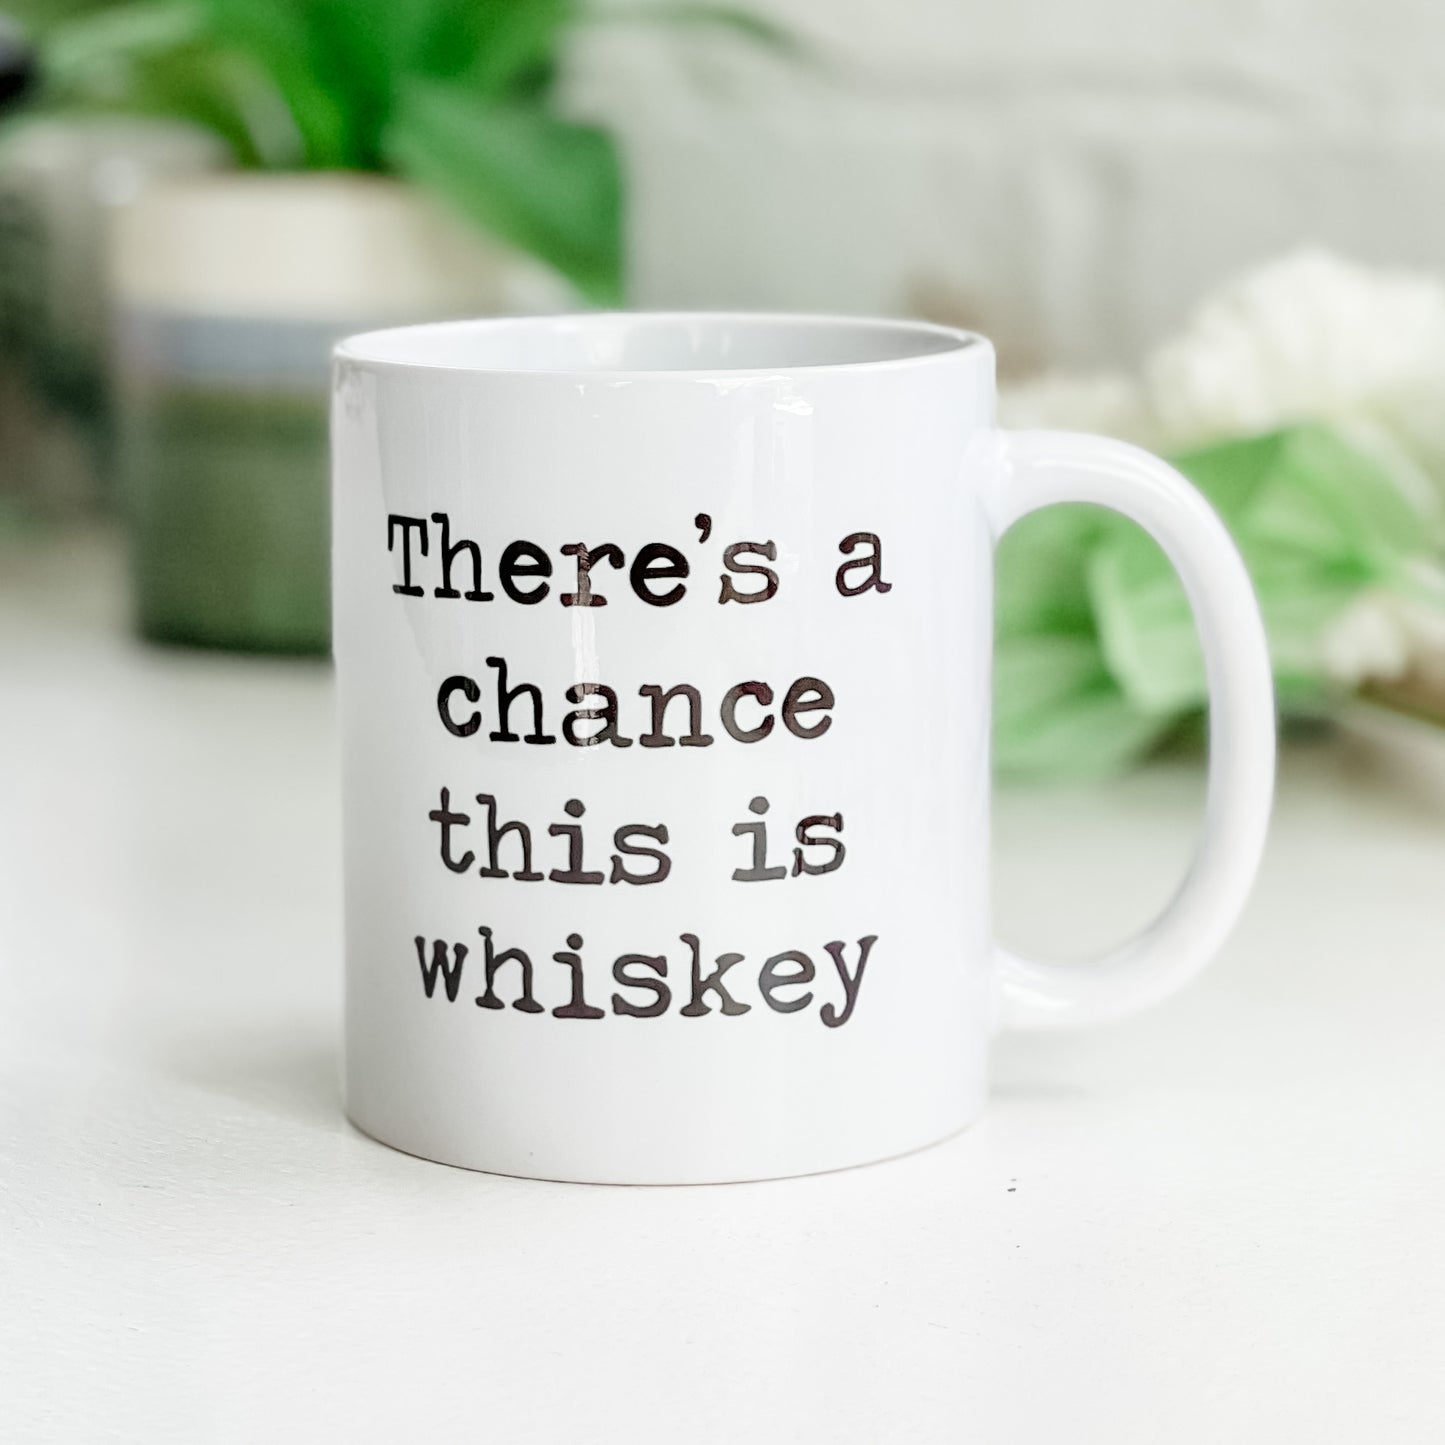 There's A Chance This Is Whiskey - 11oz Ceramic Mug